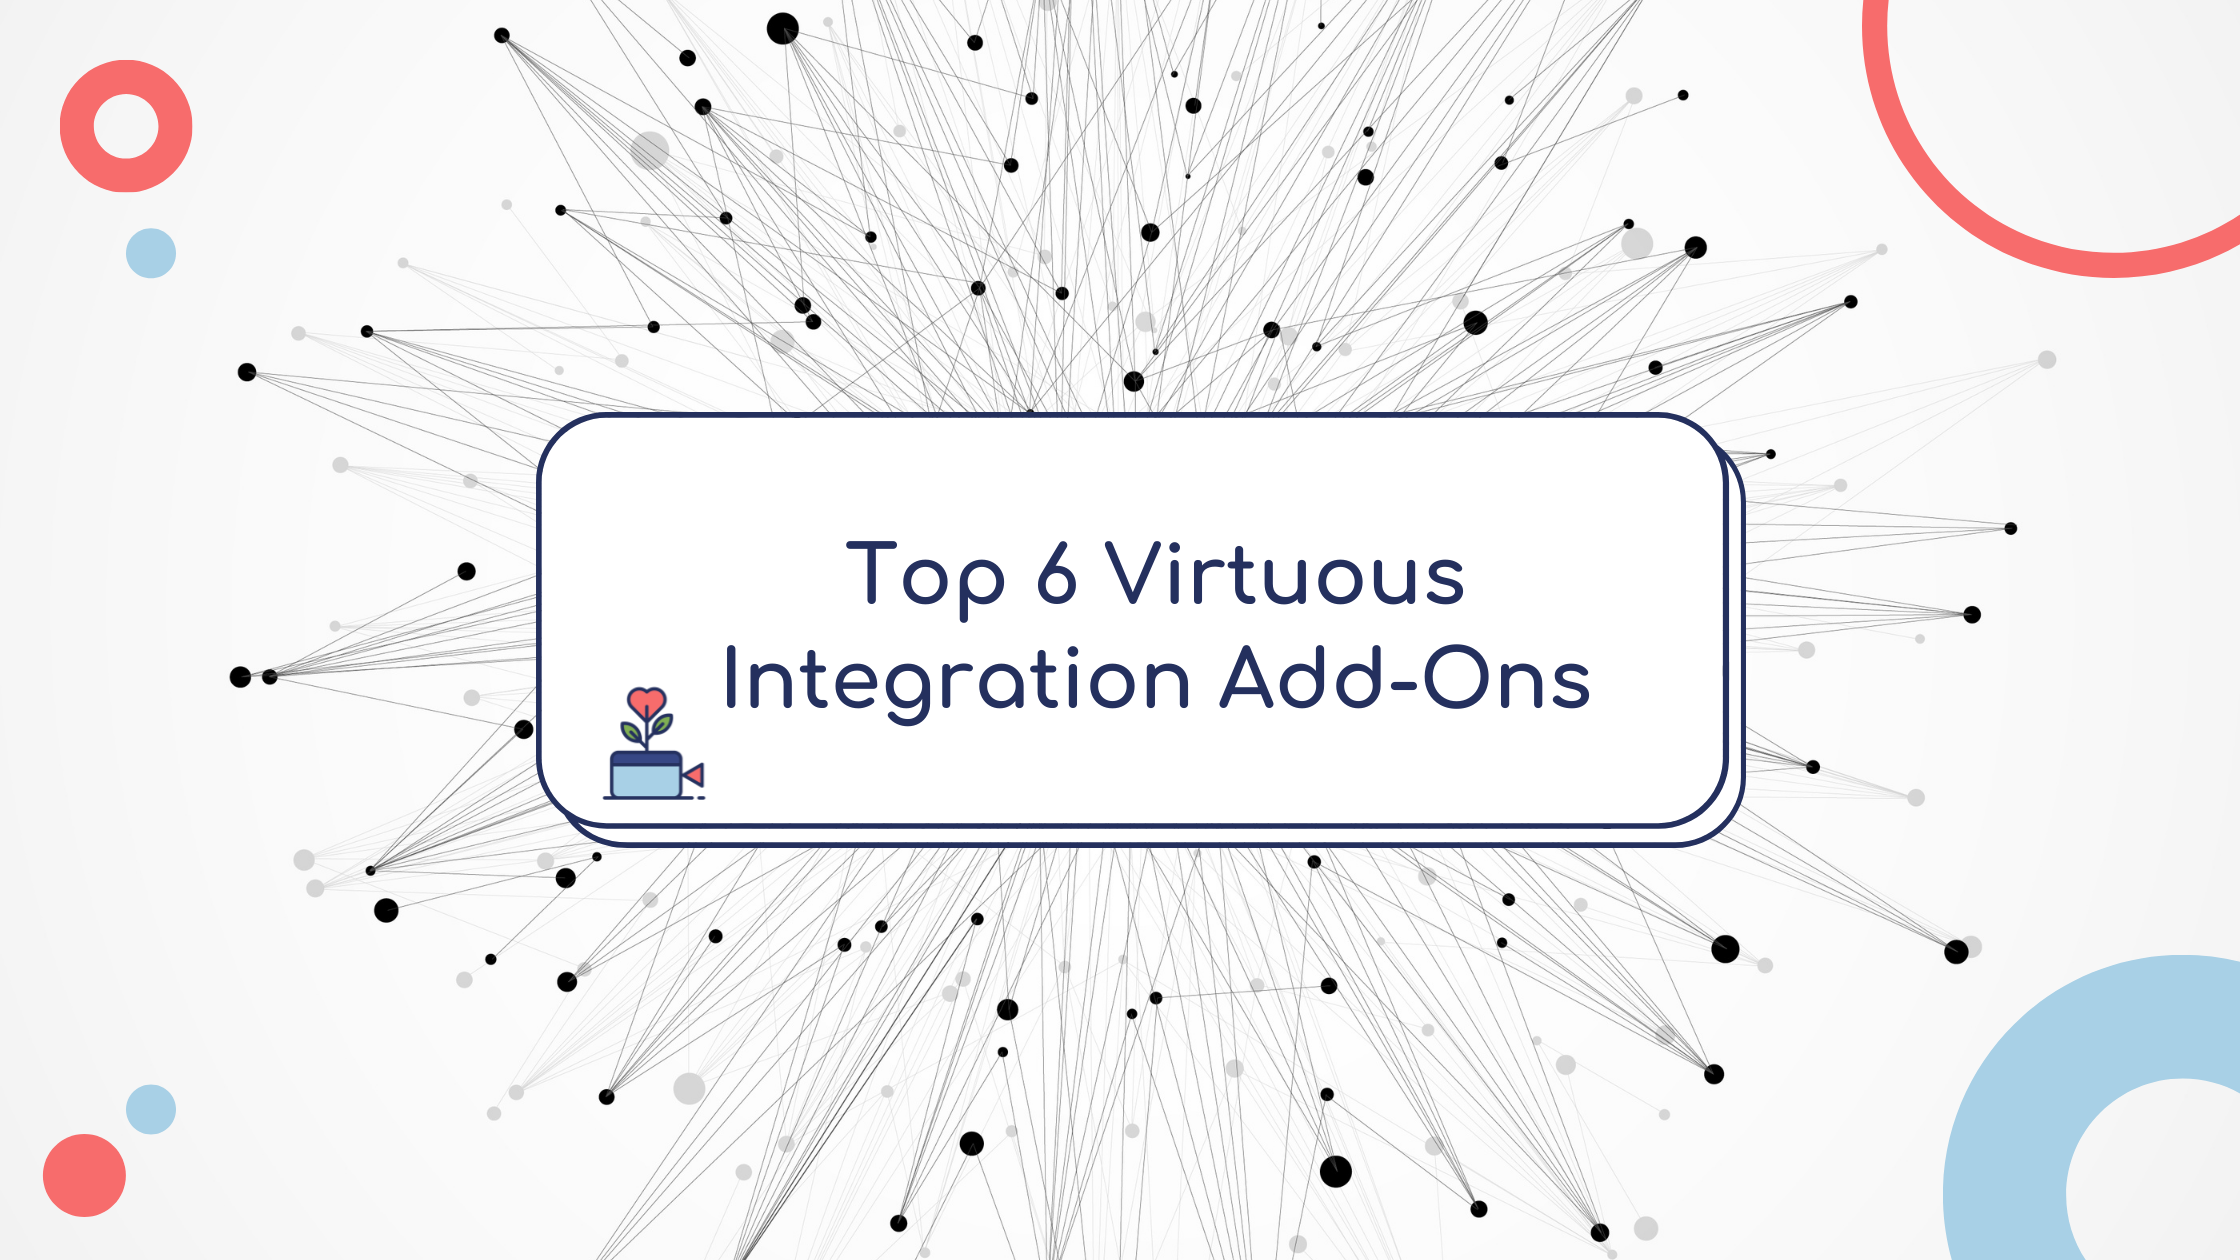 Top 6 Virtuous Integration Add Ons